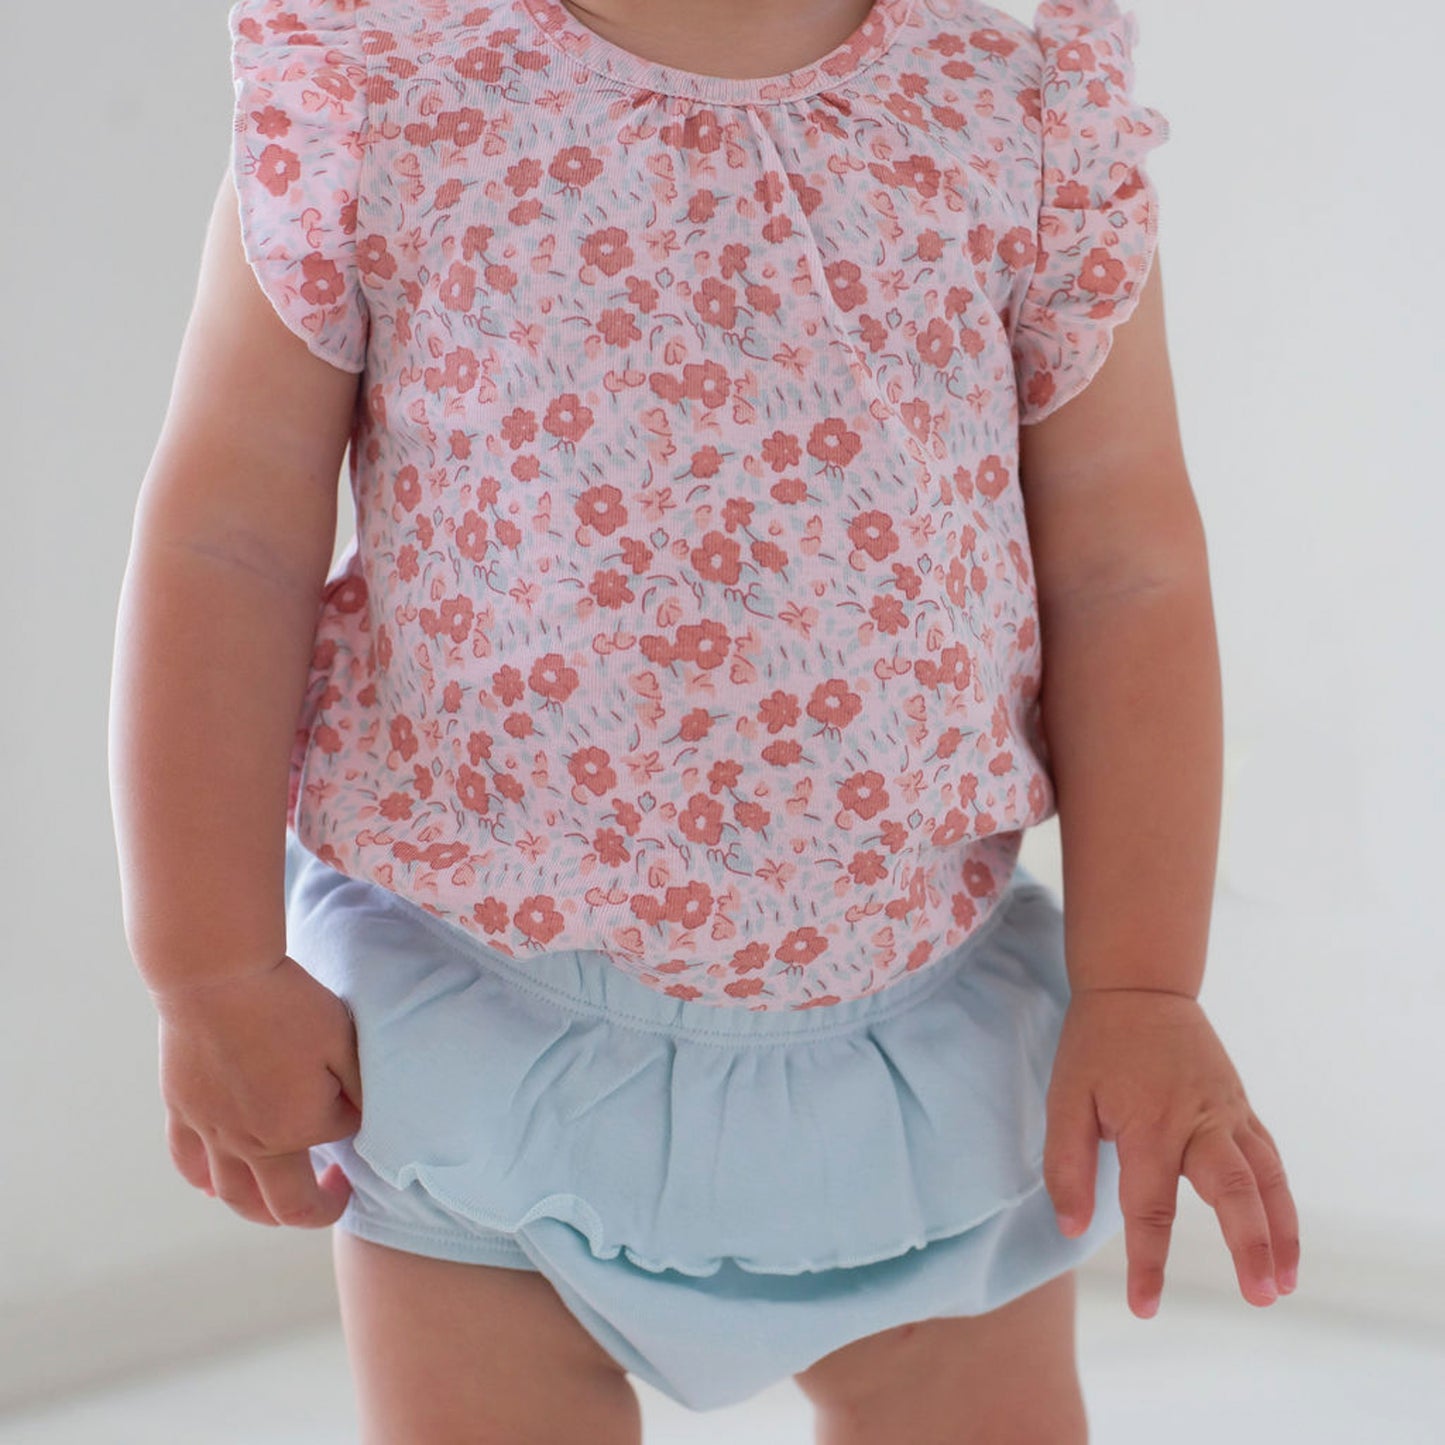 Floral Frill Top and Nappy Pant Set